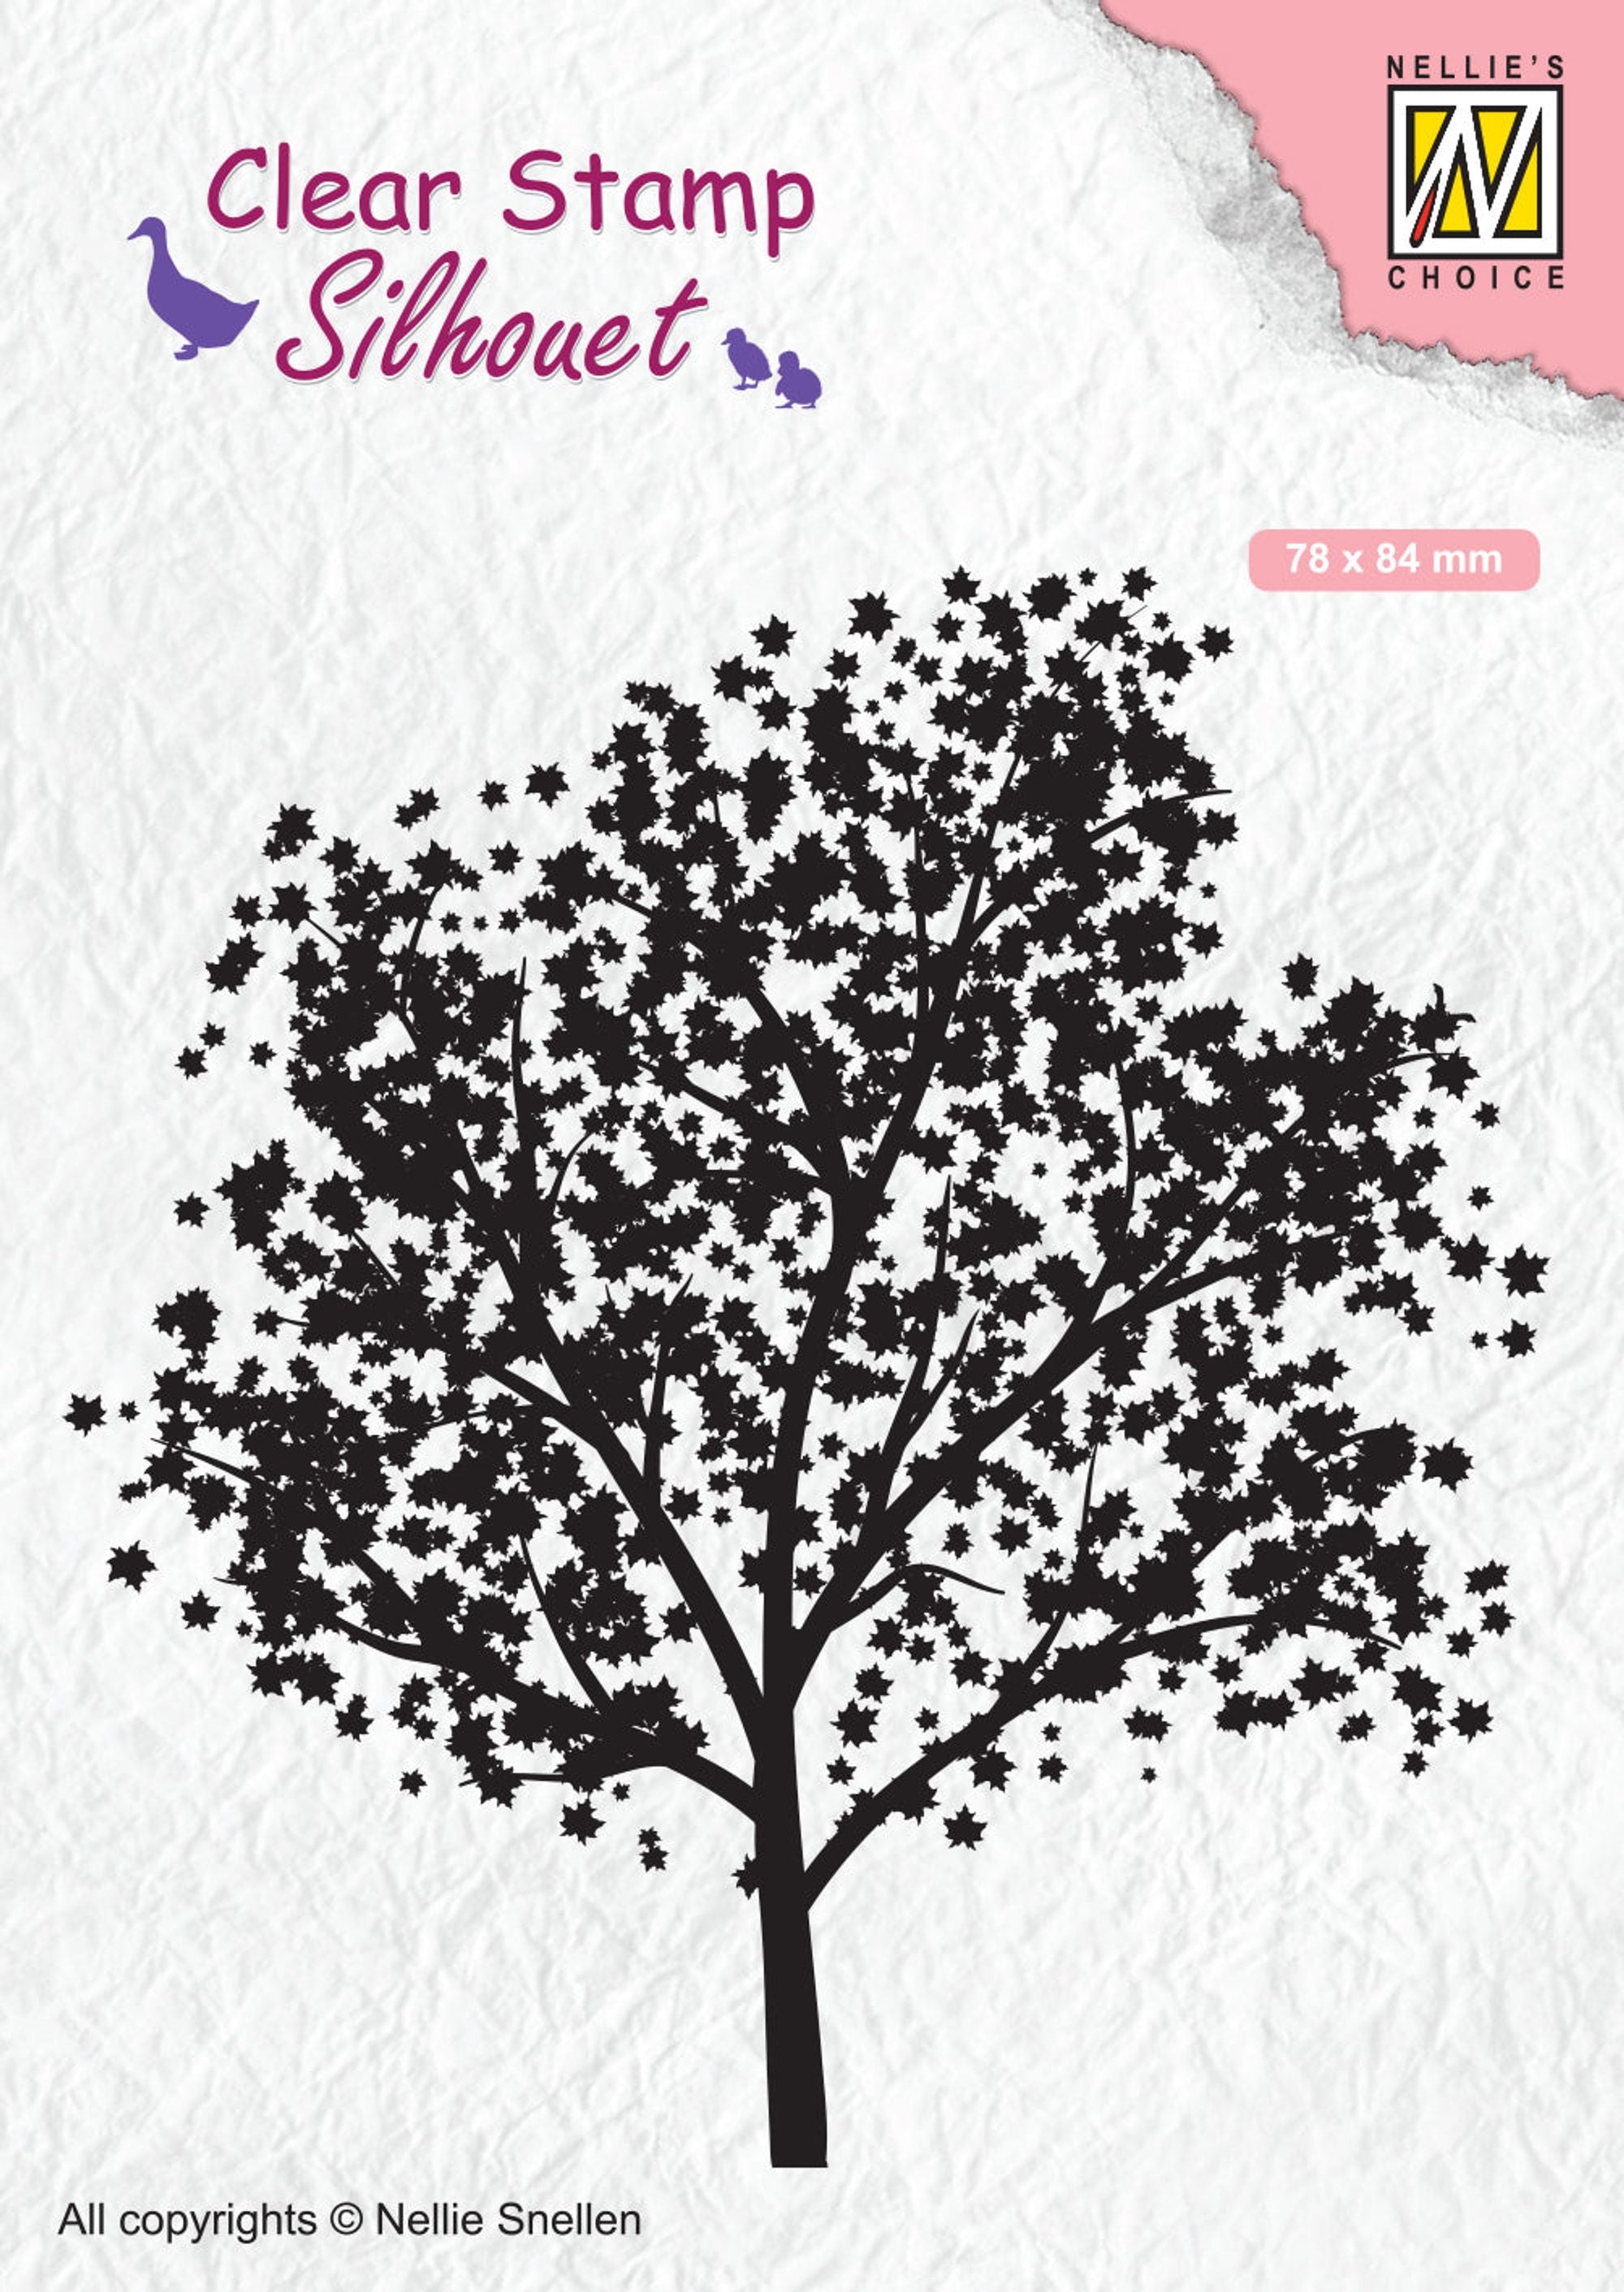 Clear Stamp Silhouette Tree